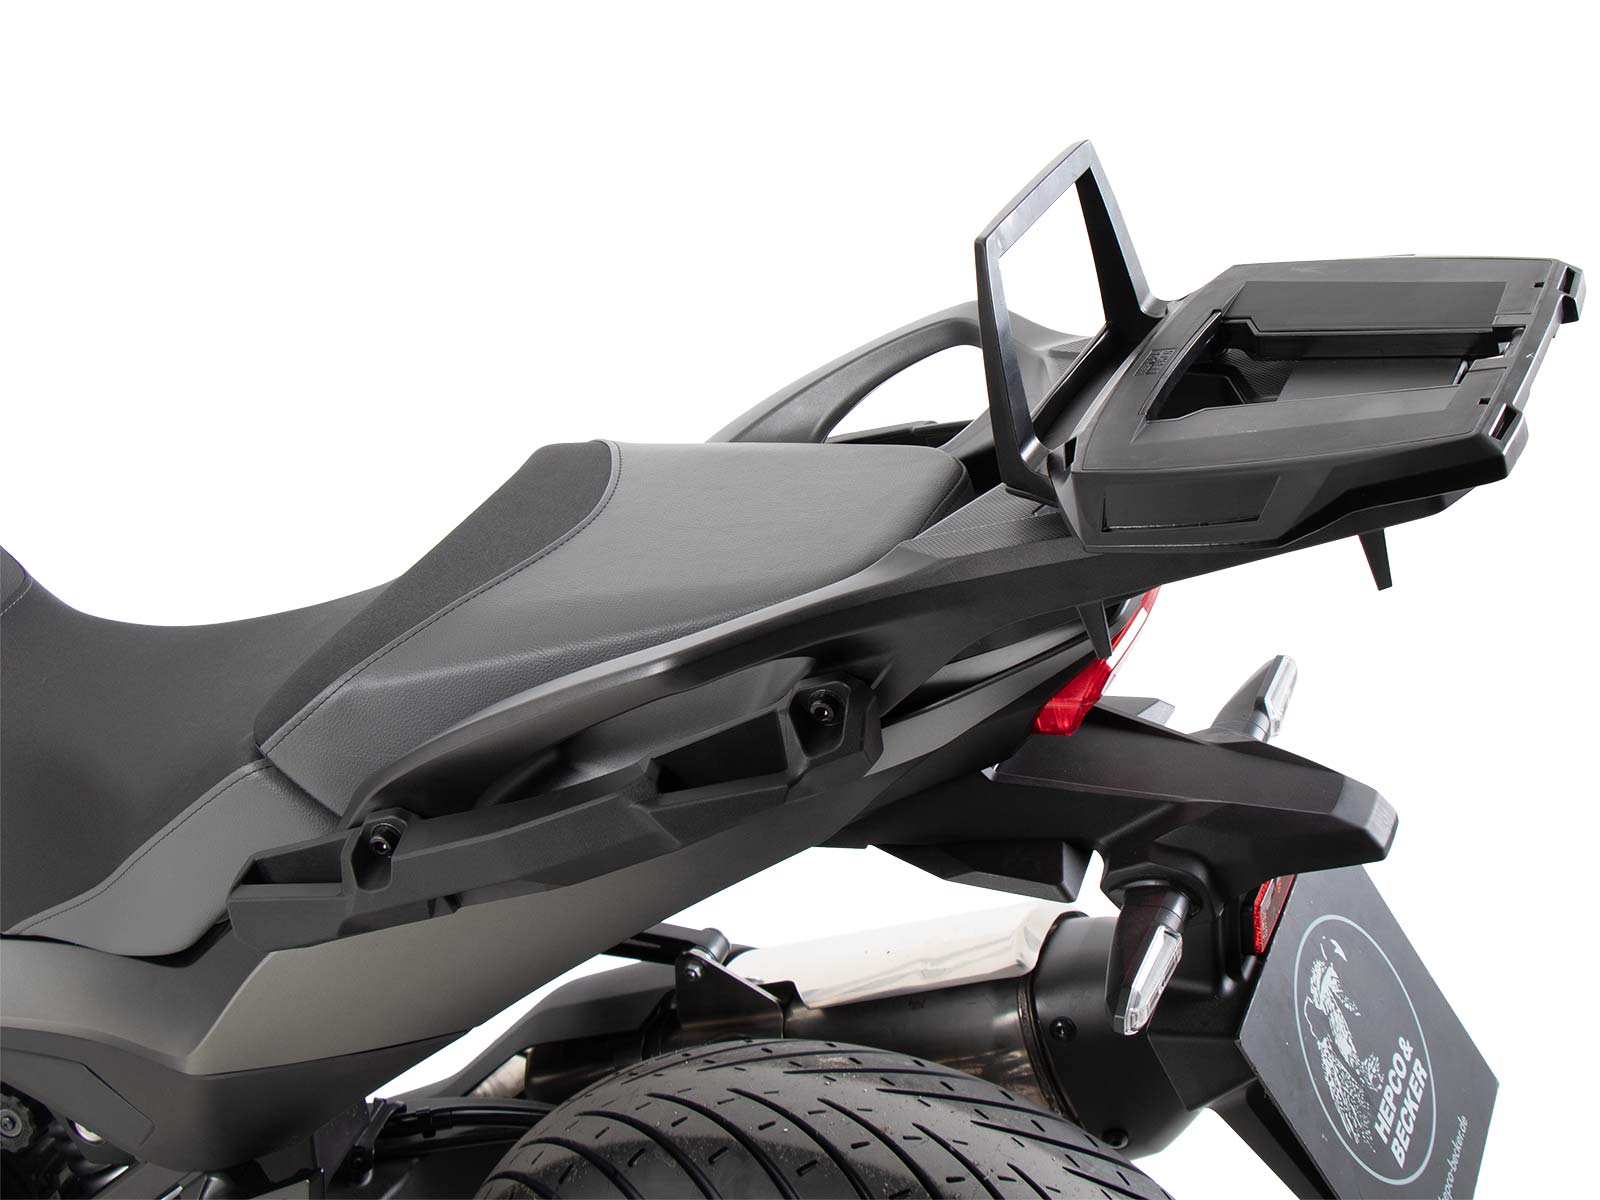 Alurack top case carrier black for combination with original rear rack for Honda NT 1100 (2022-)